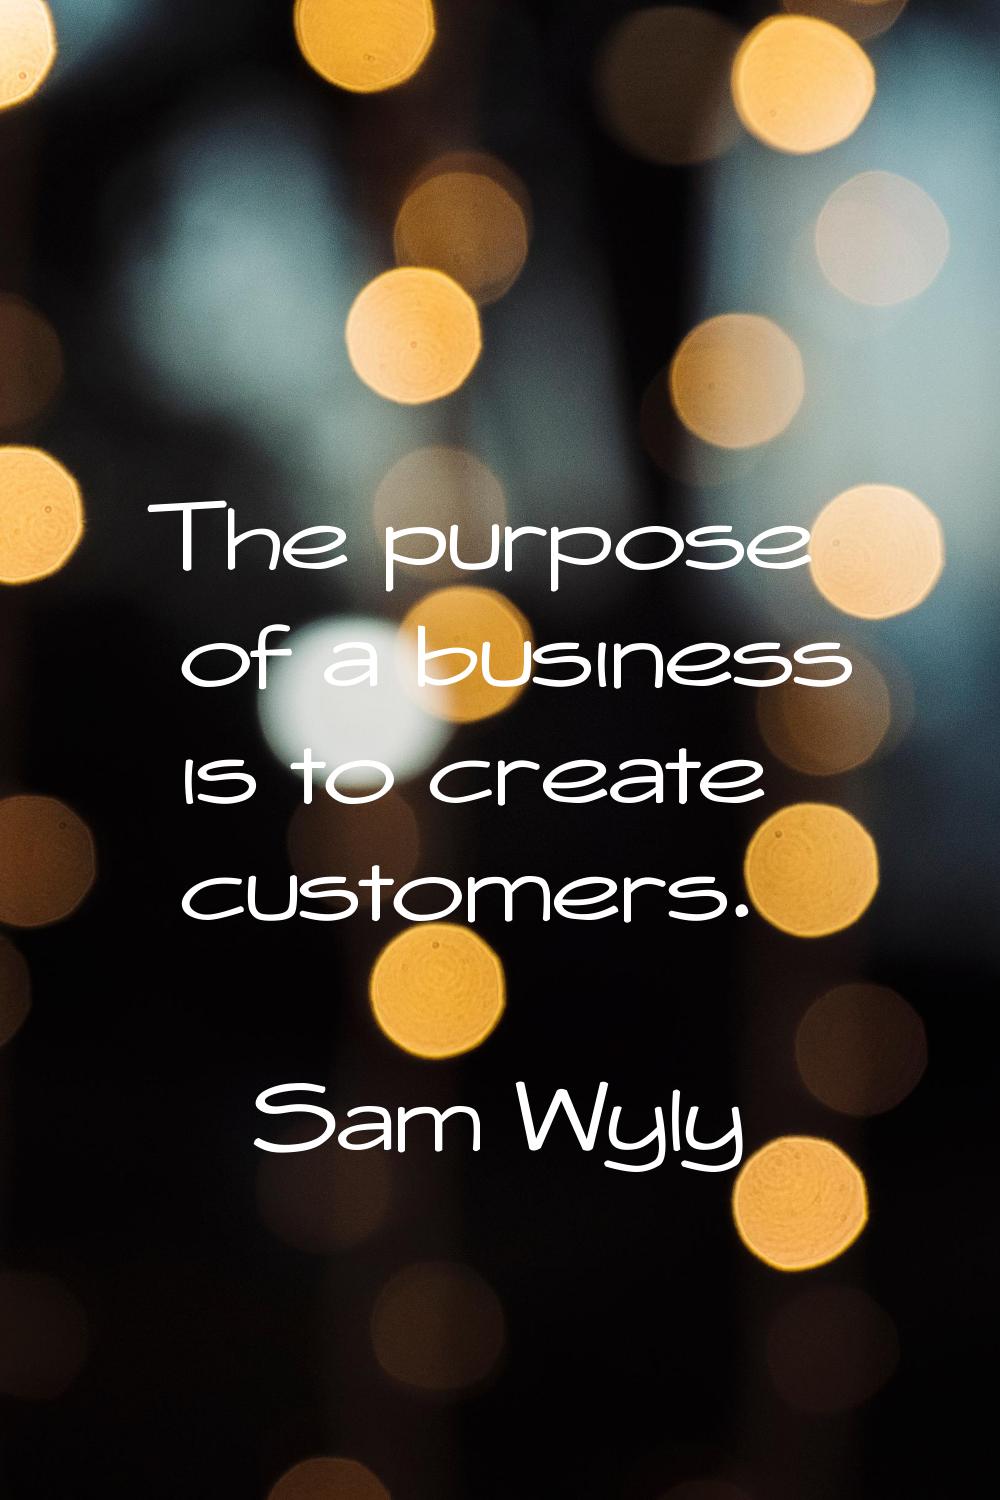 The purpose of a business is to create customers.